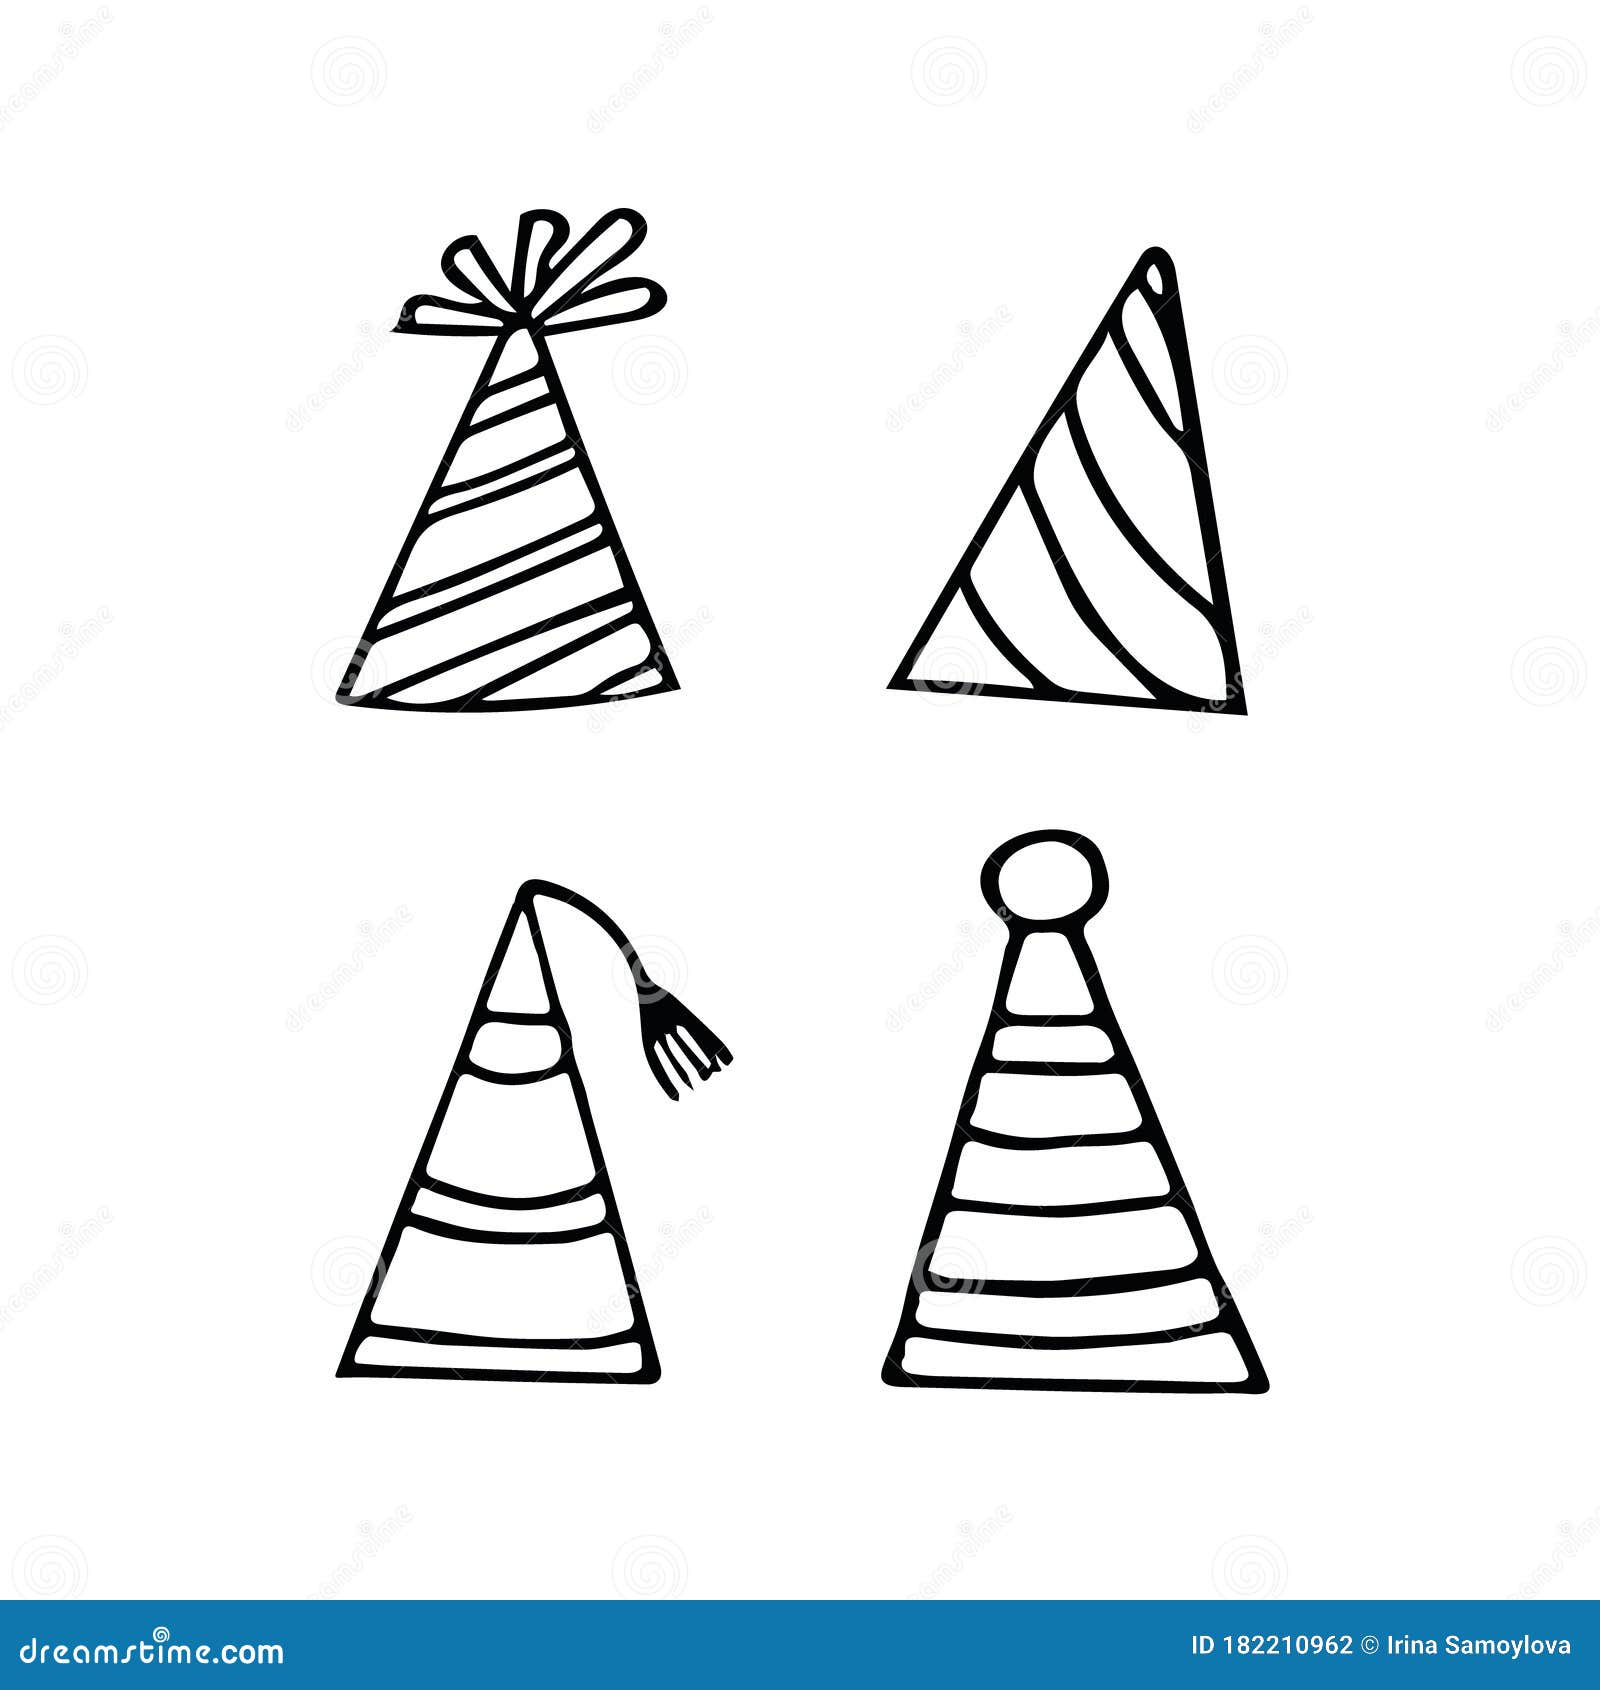 Birthday Hat Black And White Clipart Images For Free Download - Pngtree